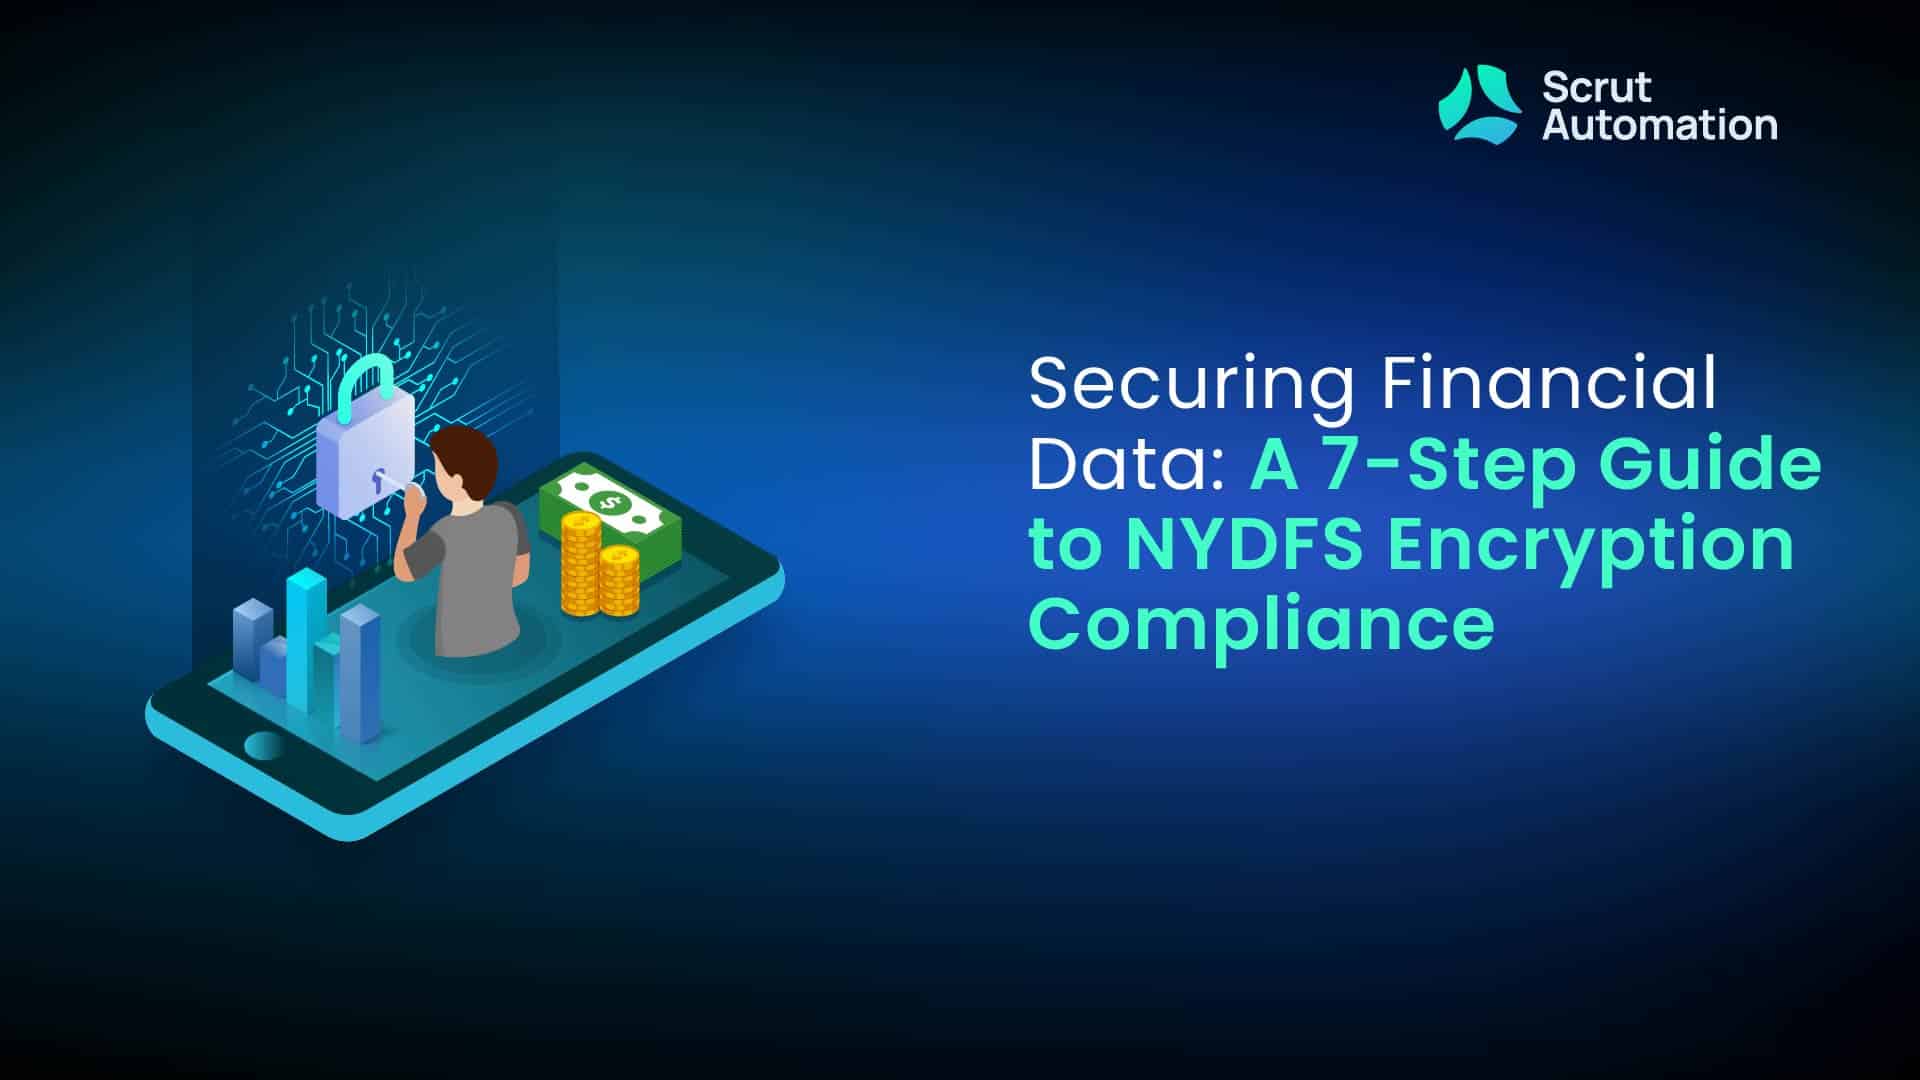 NYDFS Encryption Compliance